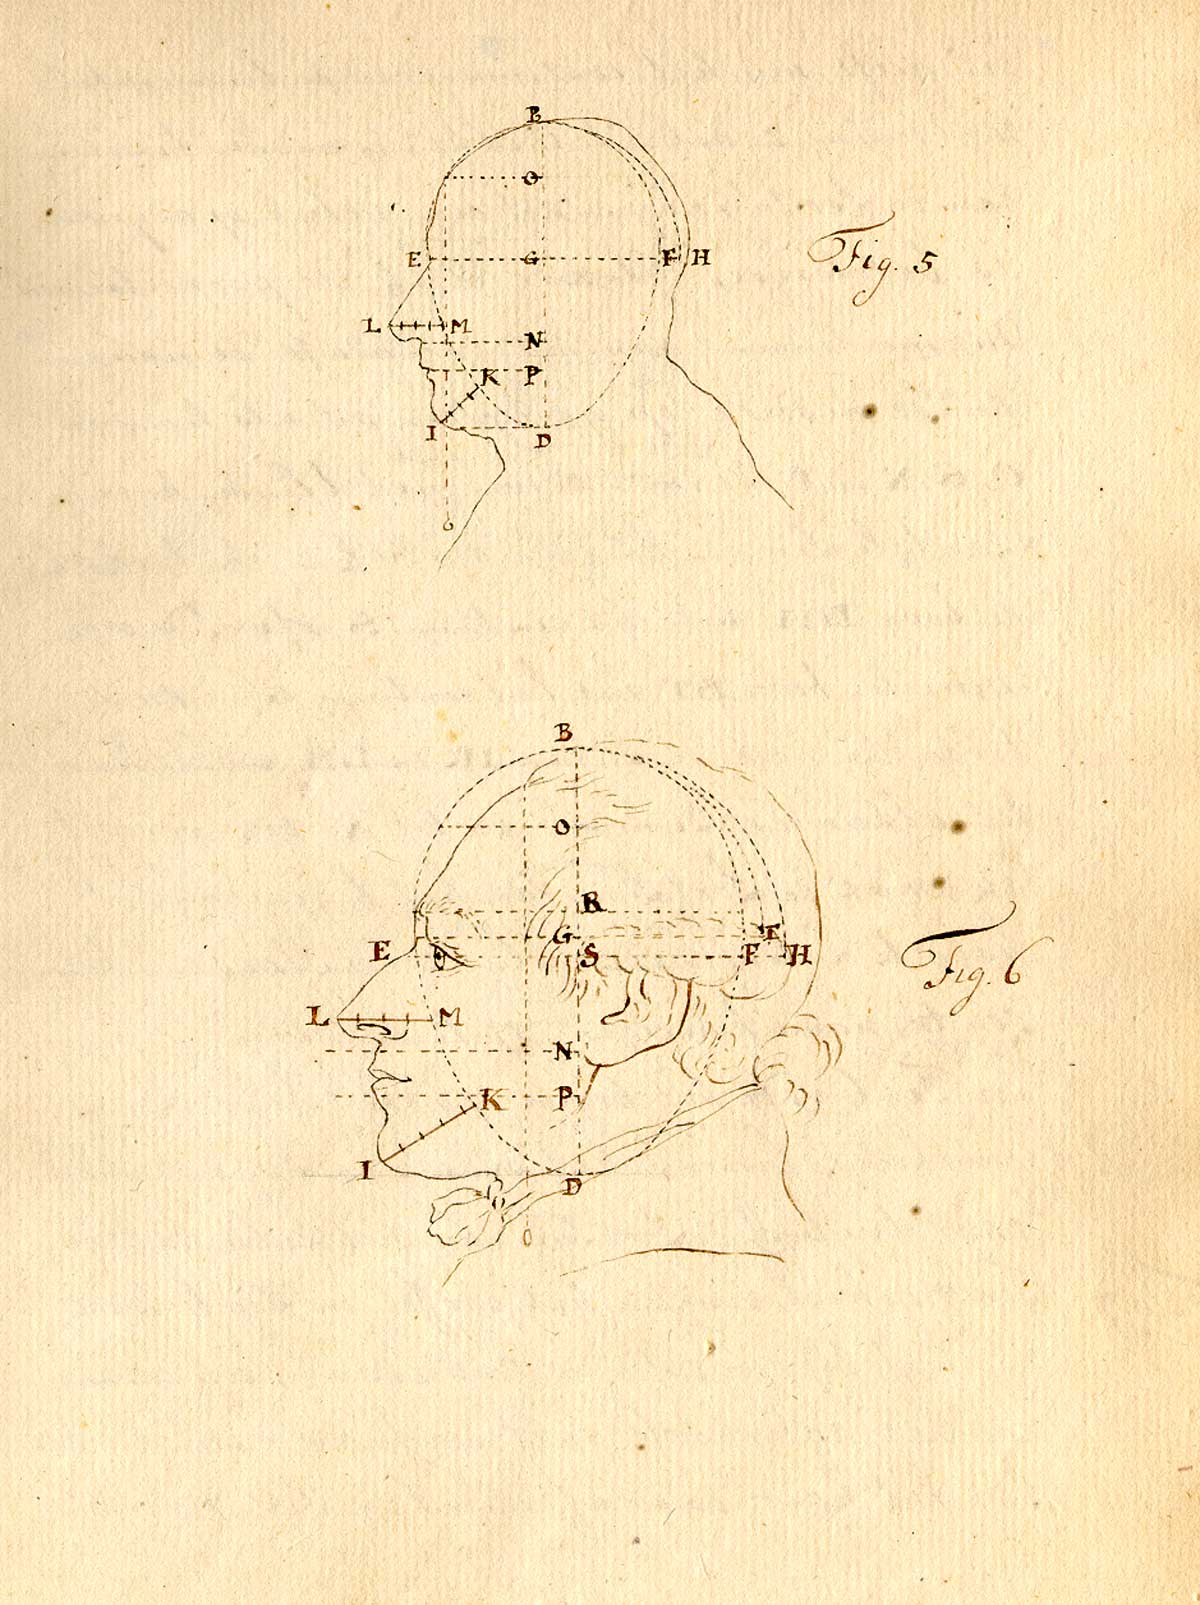 Manuscript drawings of two male heads in profile facing the left, each with indexed lines showing proportional measurements and shapes of the head, from Anonymous treatise on physiognomy, NLM call no.: MS B 662.